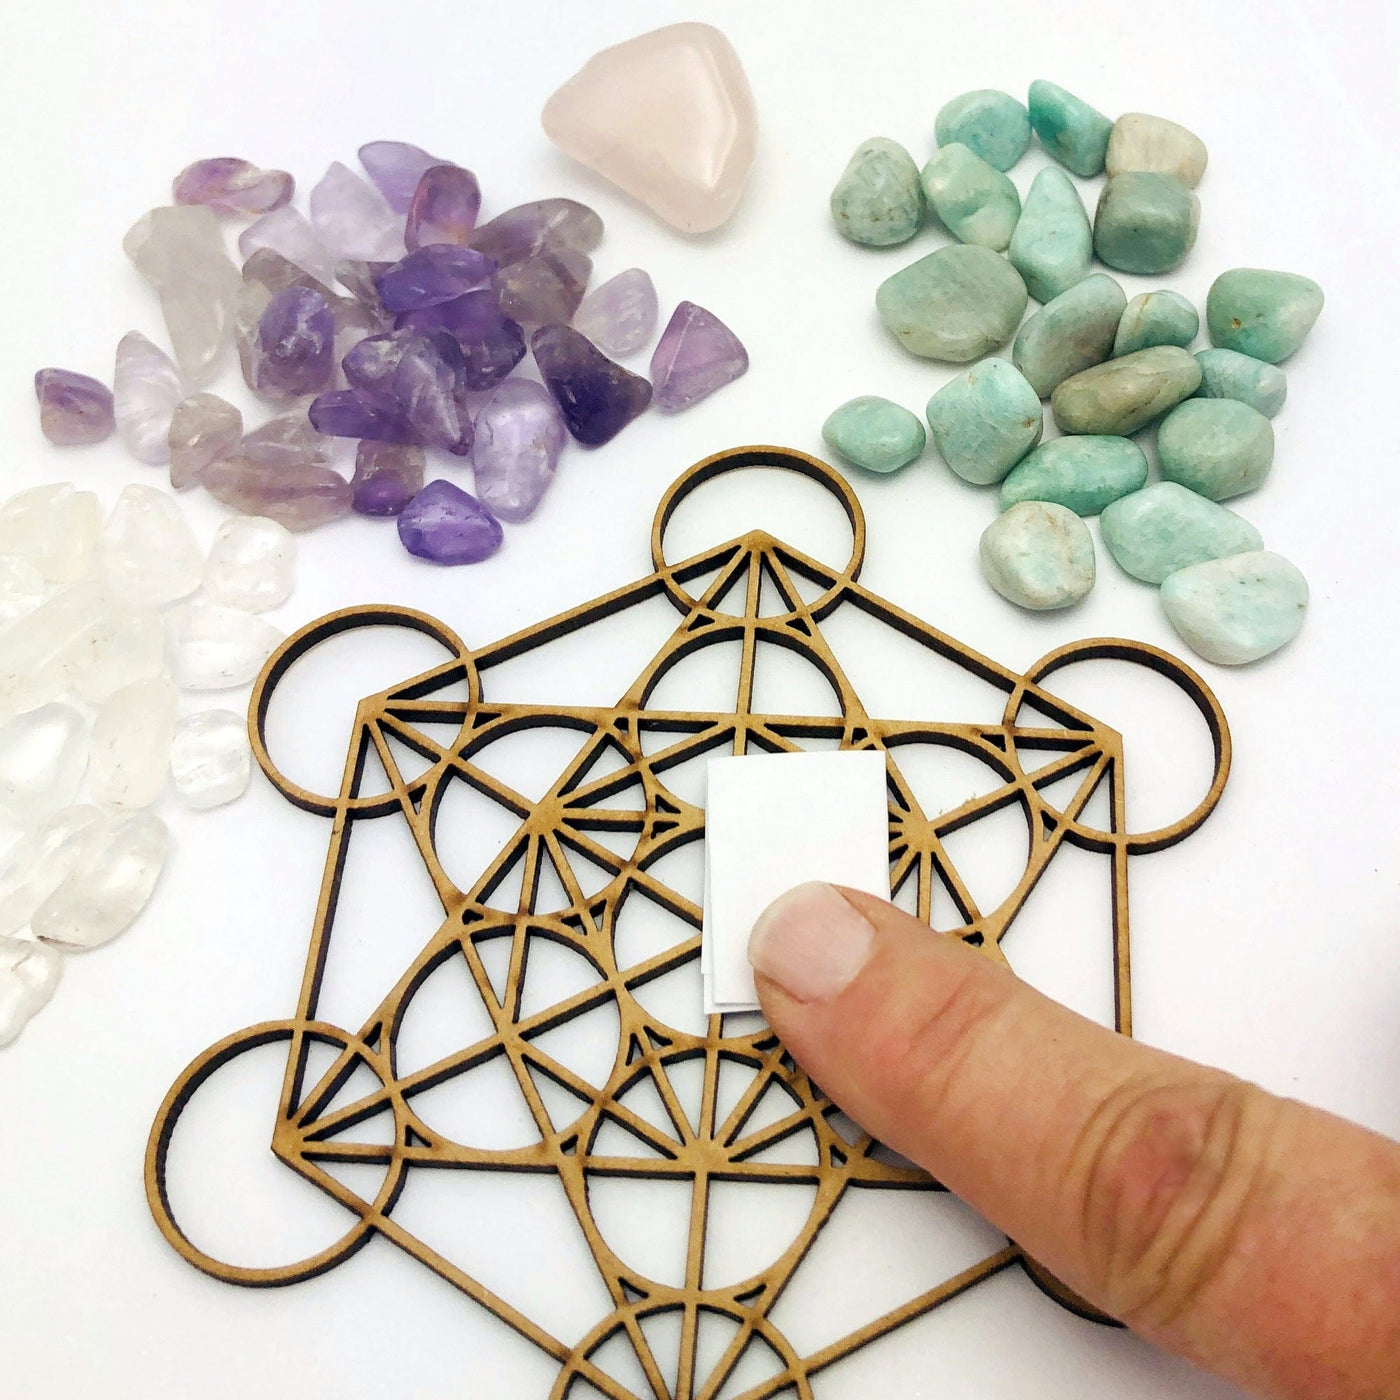 Love Crystal Grid Set showing placing of intention